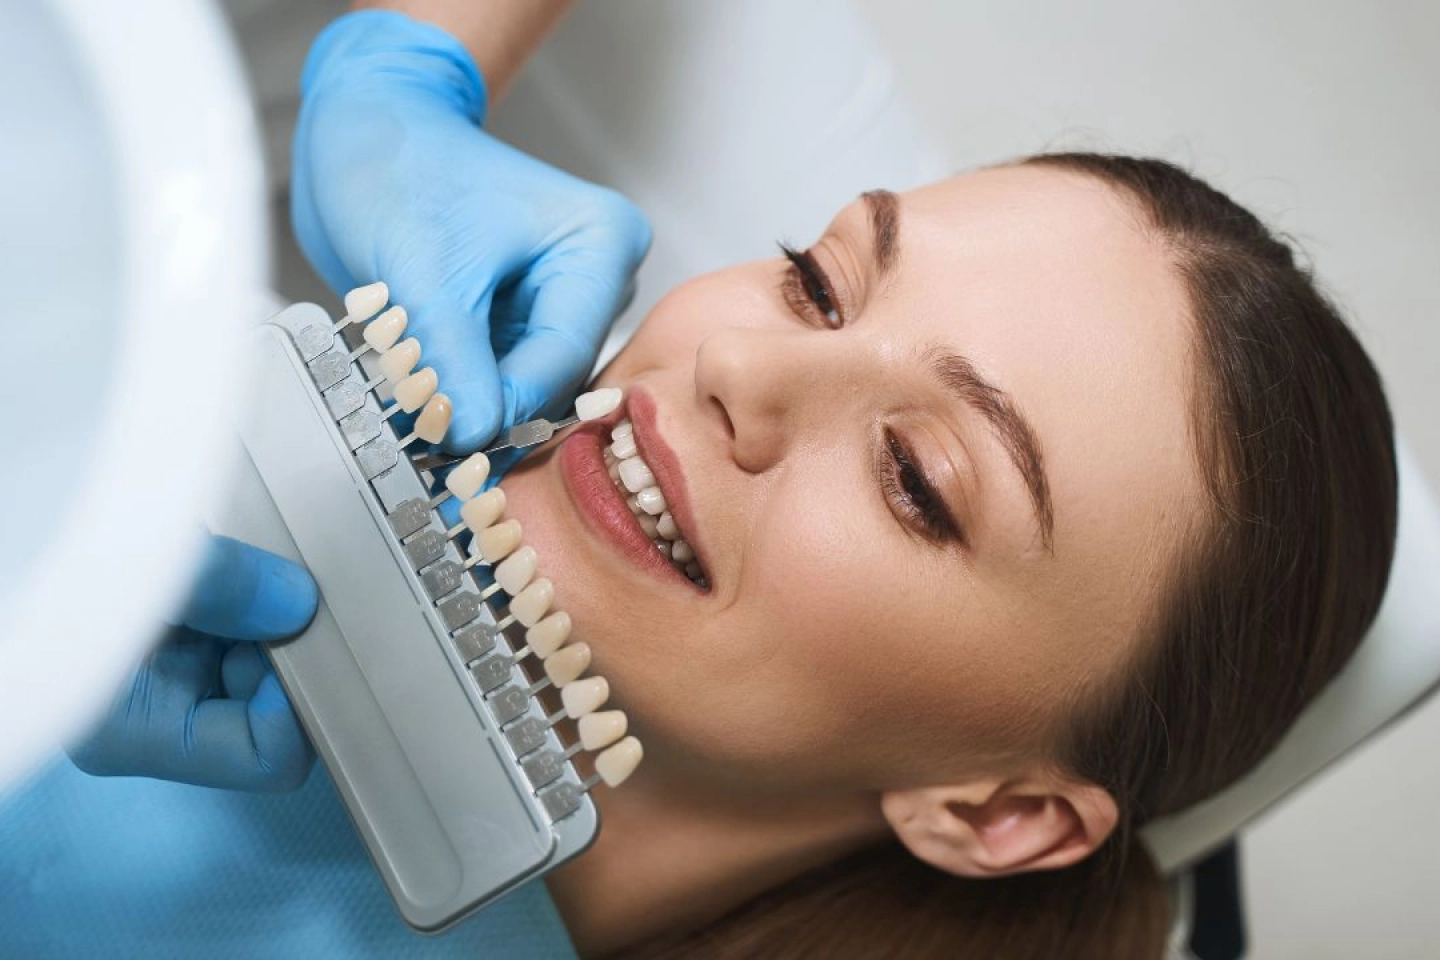 Transform Your Smile with Veneers at IM Dentistry.